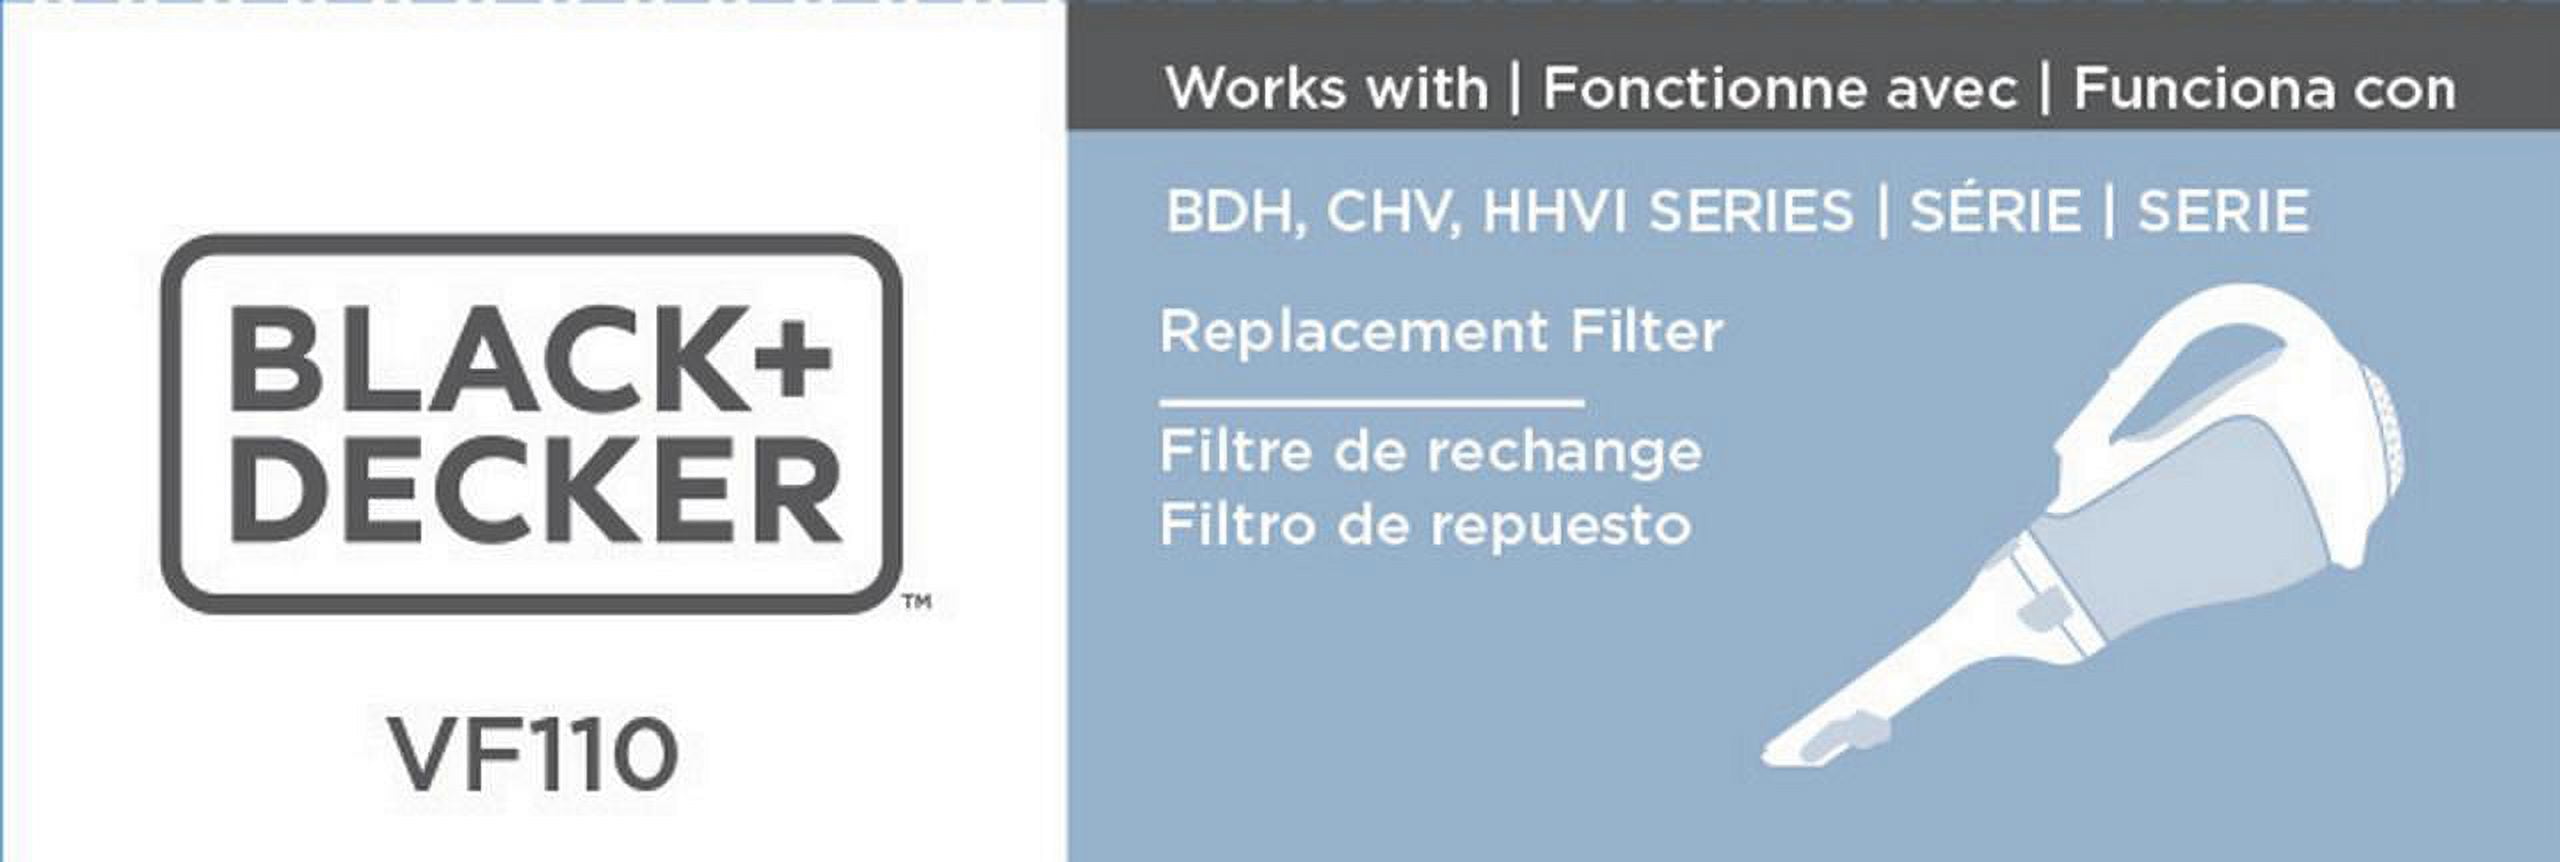 12 Pack Vf110 Filters Replacement for Black and Decker Hand Vacuum Filter by Blutoget - replaces Chv1410l HHVI315JO42 Chv9610 Chv1210 CHV1510